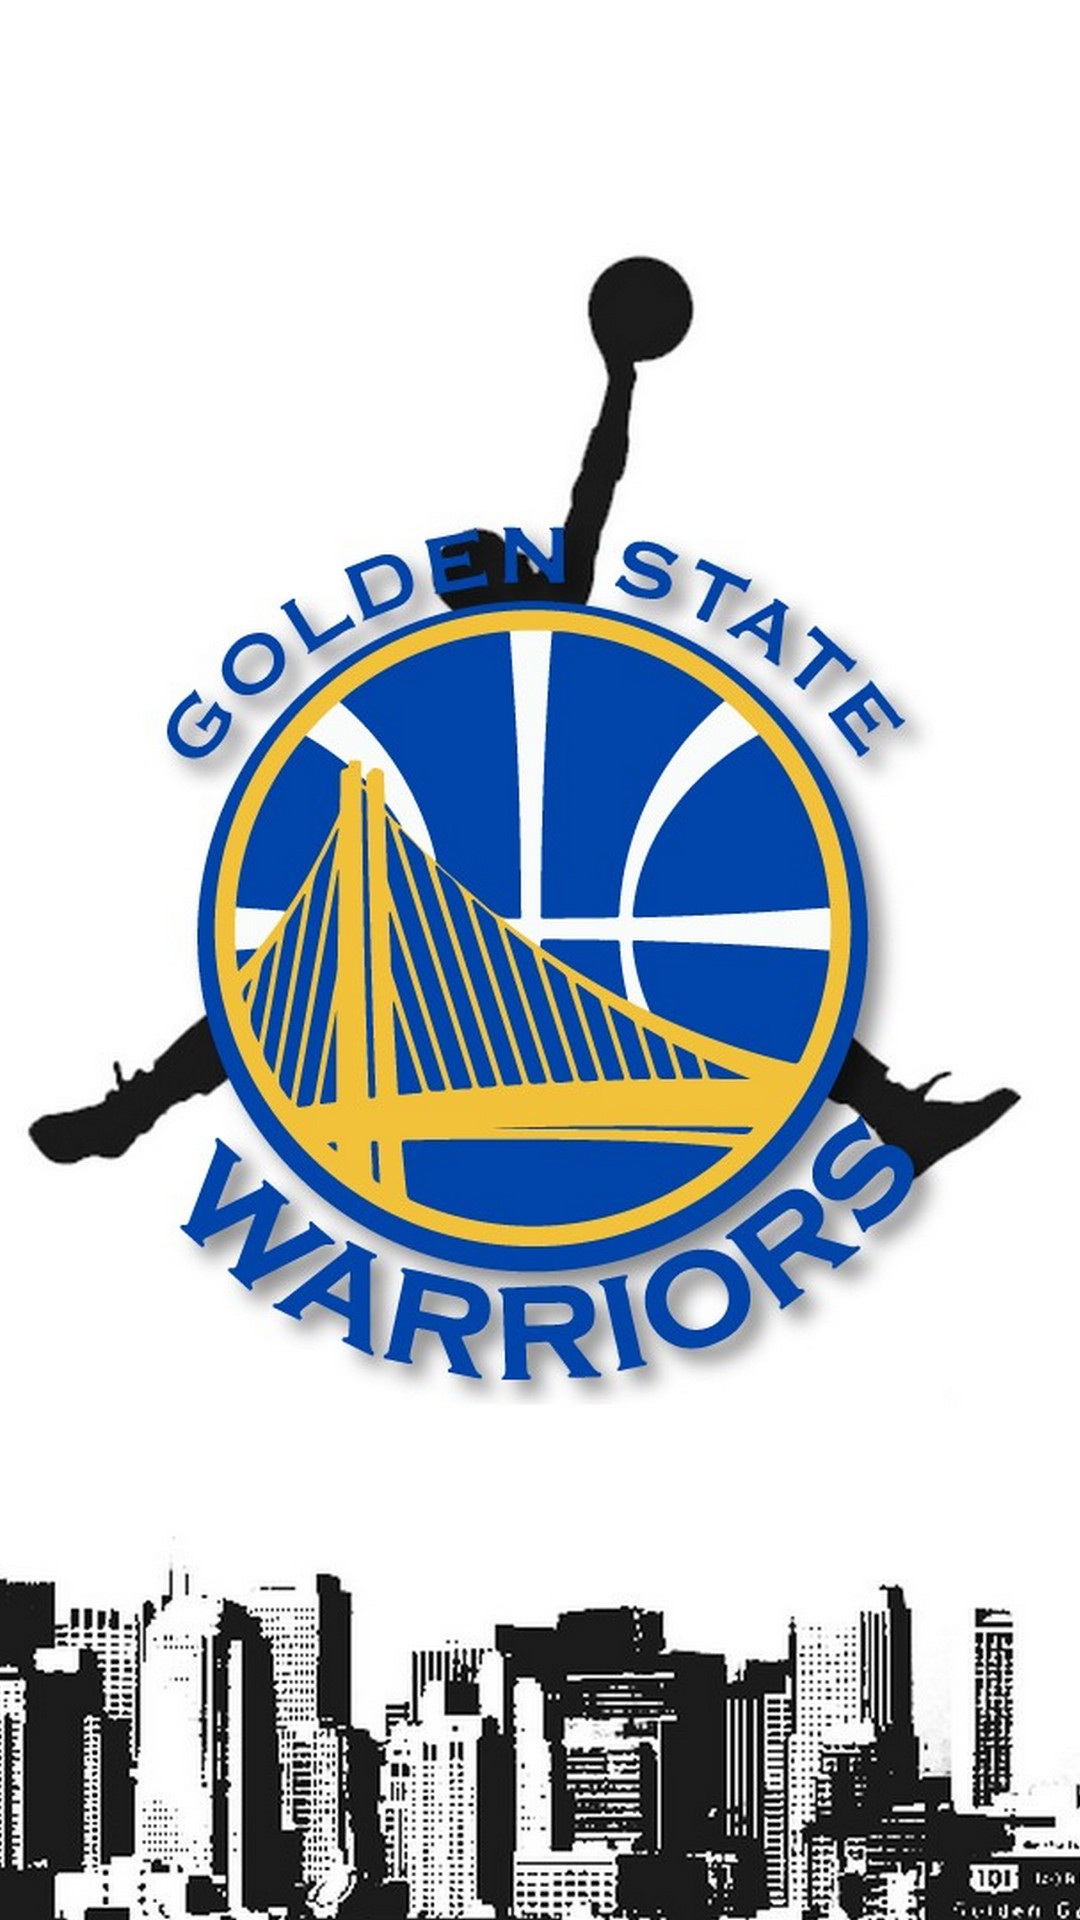 Wallpapers Phone Golden State Warriors with image resolution 1080x1920 pixel. You can make this wallpaper for your Android backgrounds, Tablet, Smartphones Screensavers and Mobile Phone Lock Screen